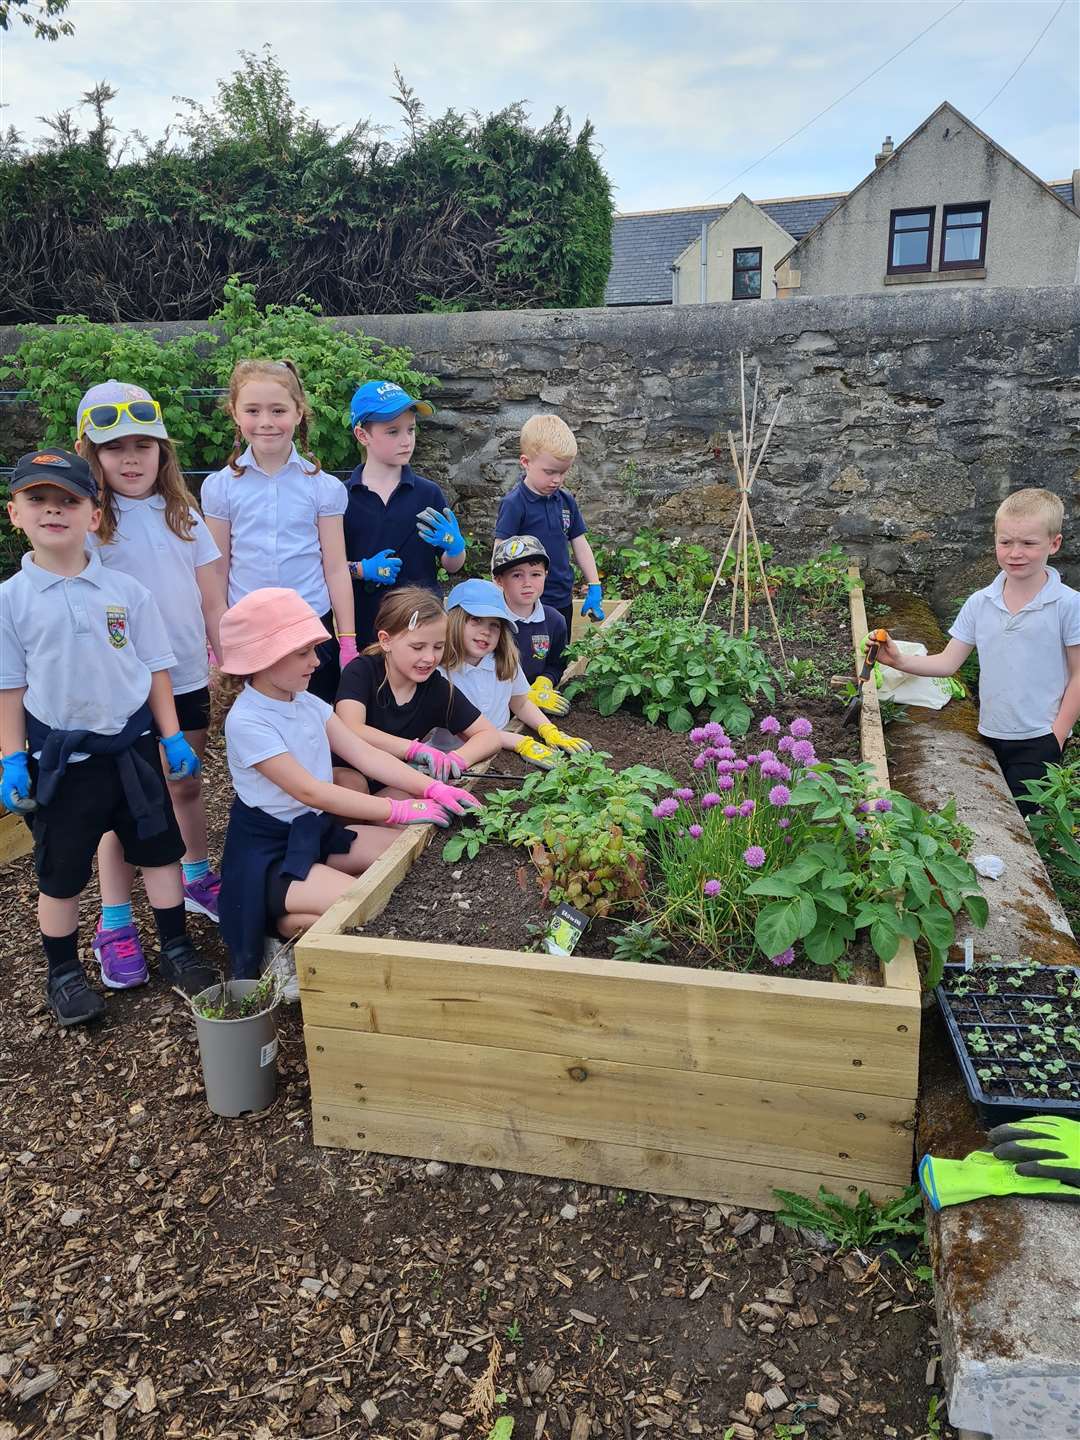 Pupils enjoying the new garden at Keith Primary School.